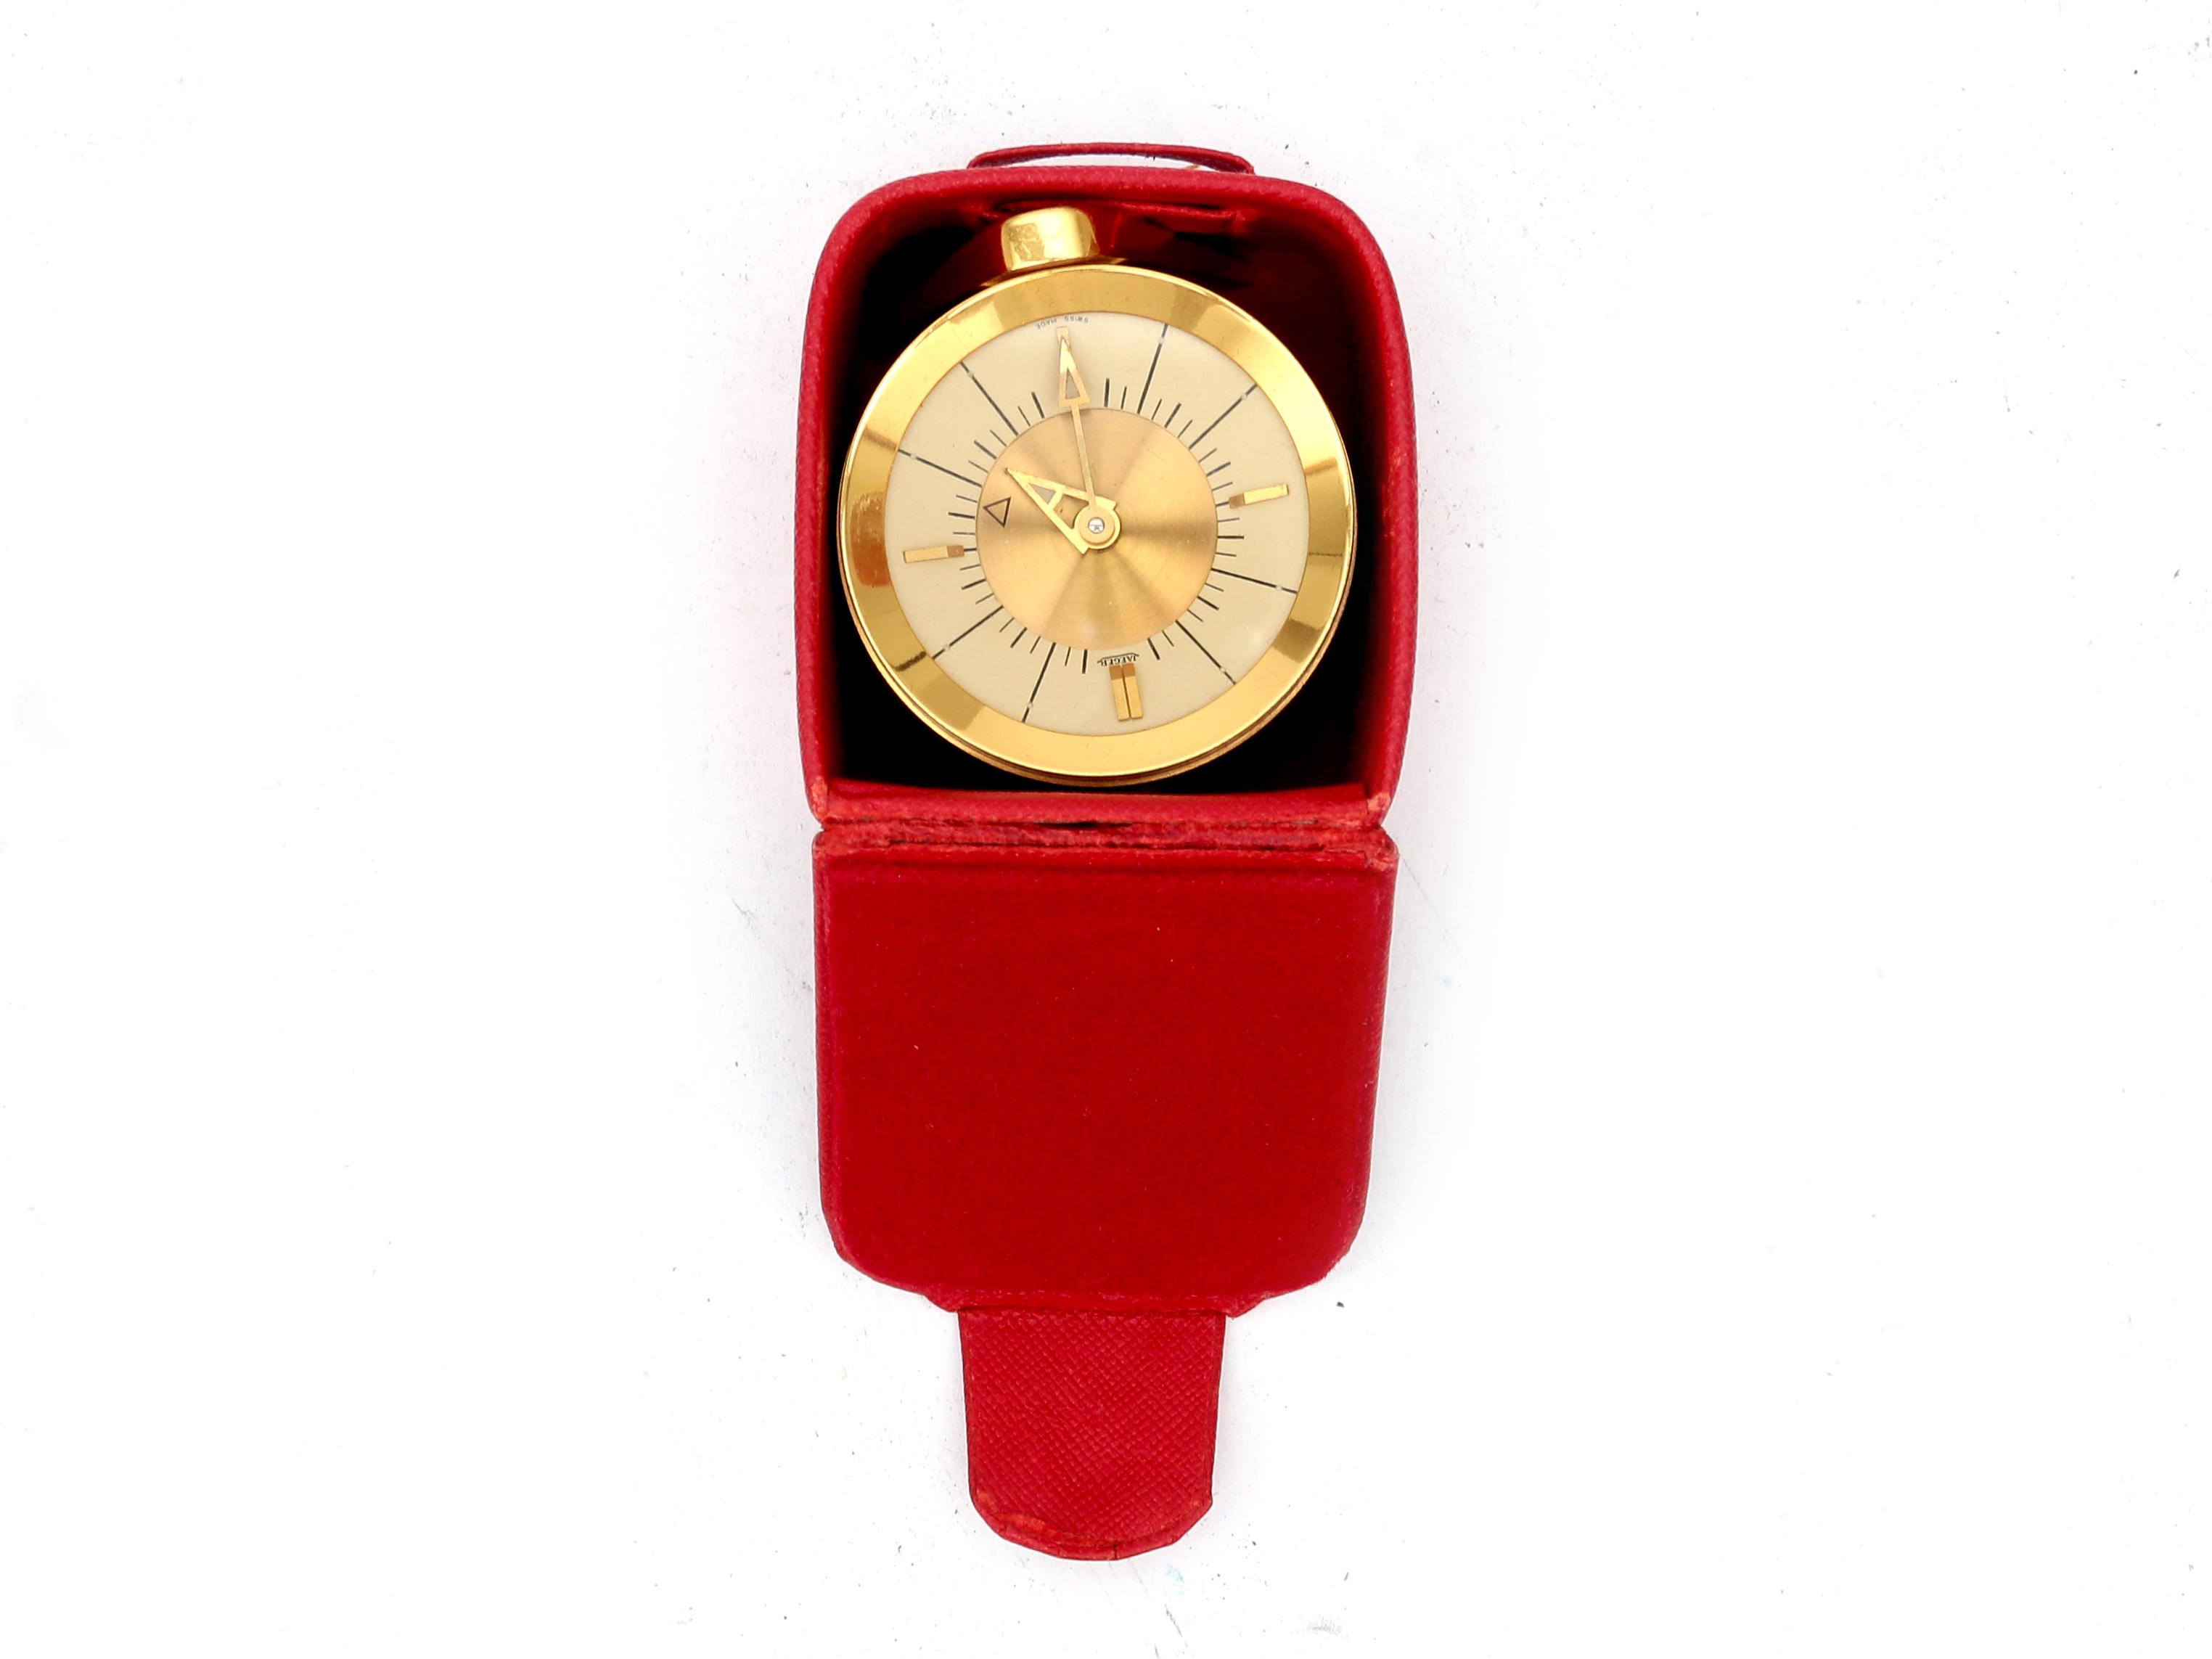 Jaeger A gilt brass travel alarm clock in red box, midcentury, marked to the dial. 5 cm. h. - Image 3 of 5